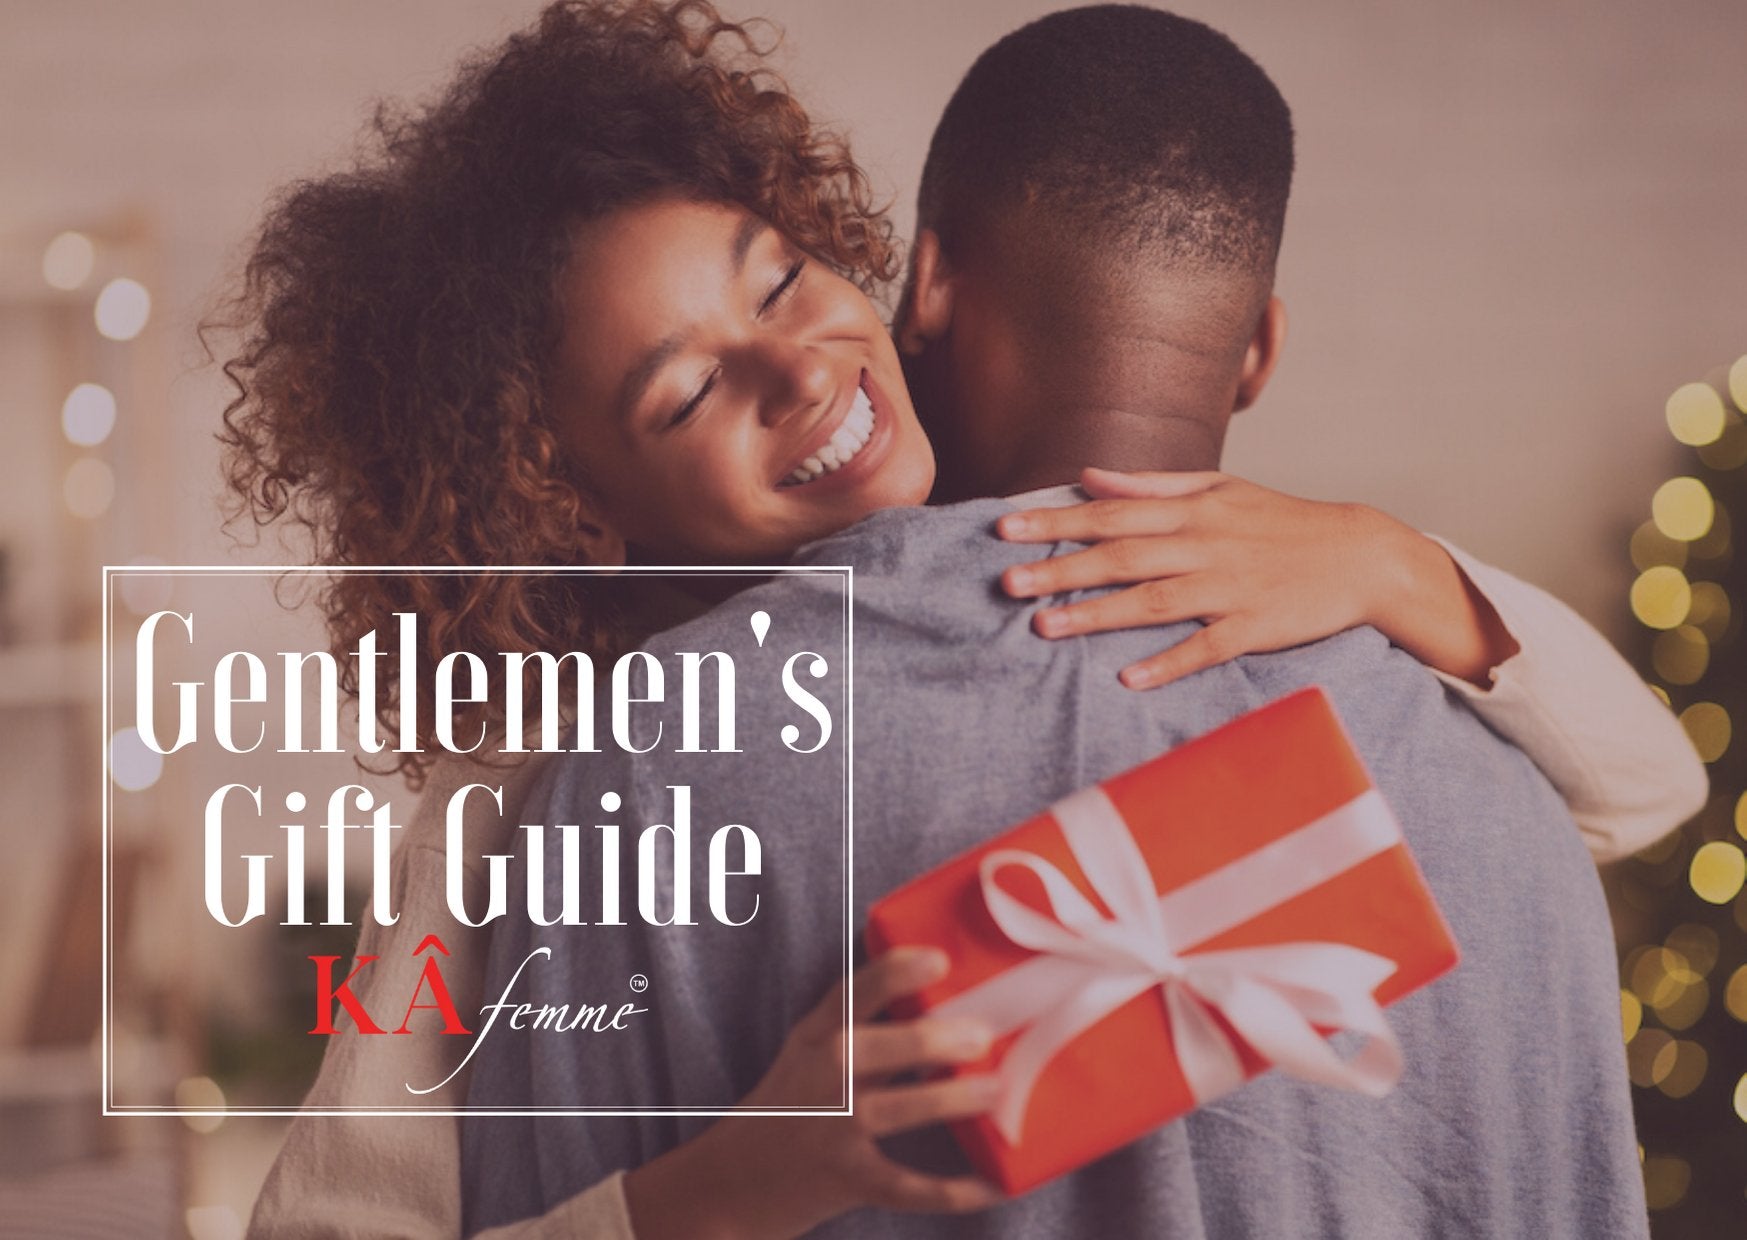 A Gentleman’s Guide to Selecting a Perfect Gift - KÂfemme